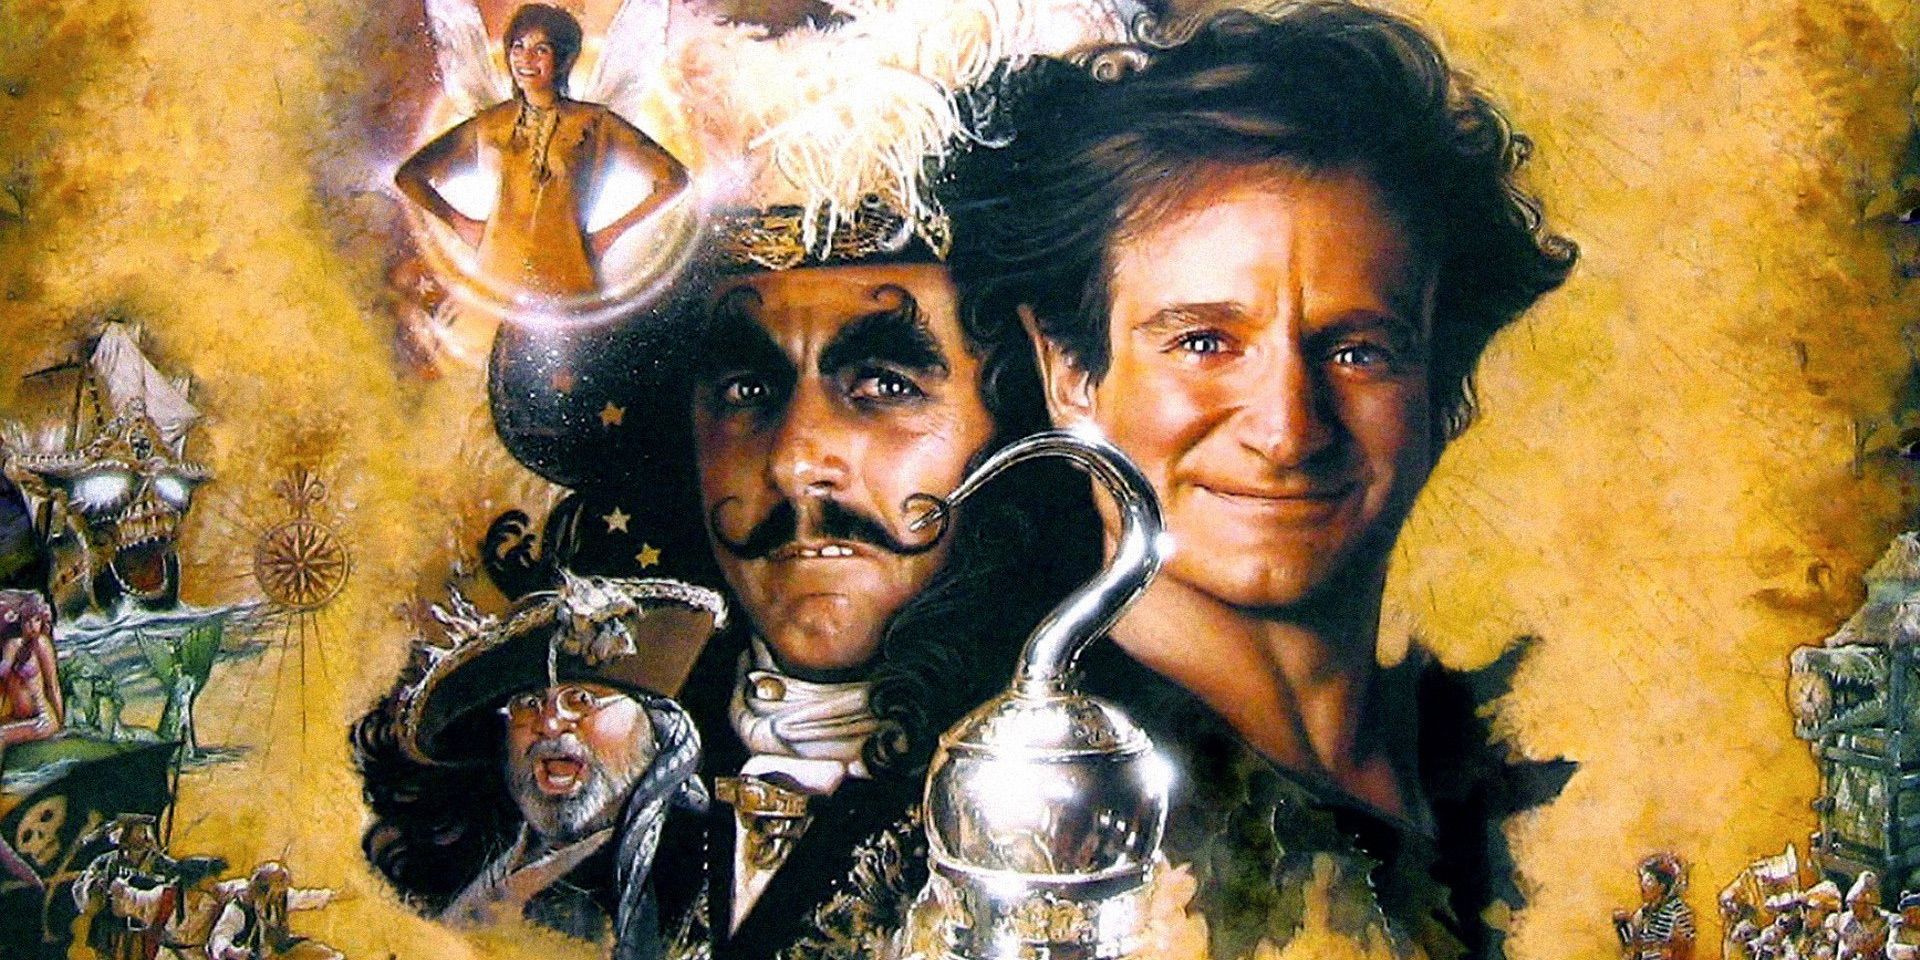 Dustin Hoffman and Bruce Willis as Hook and Peter Pan in a poster for Hook.